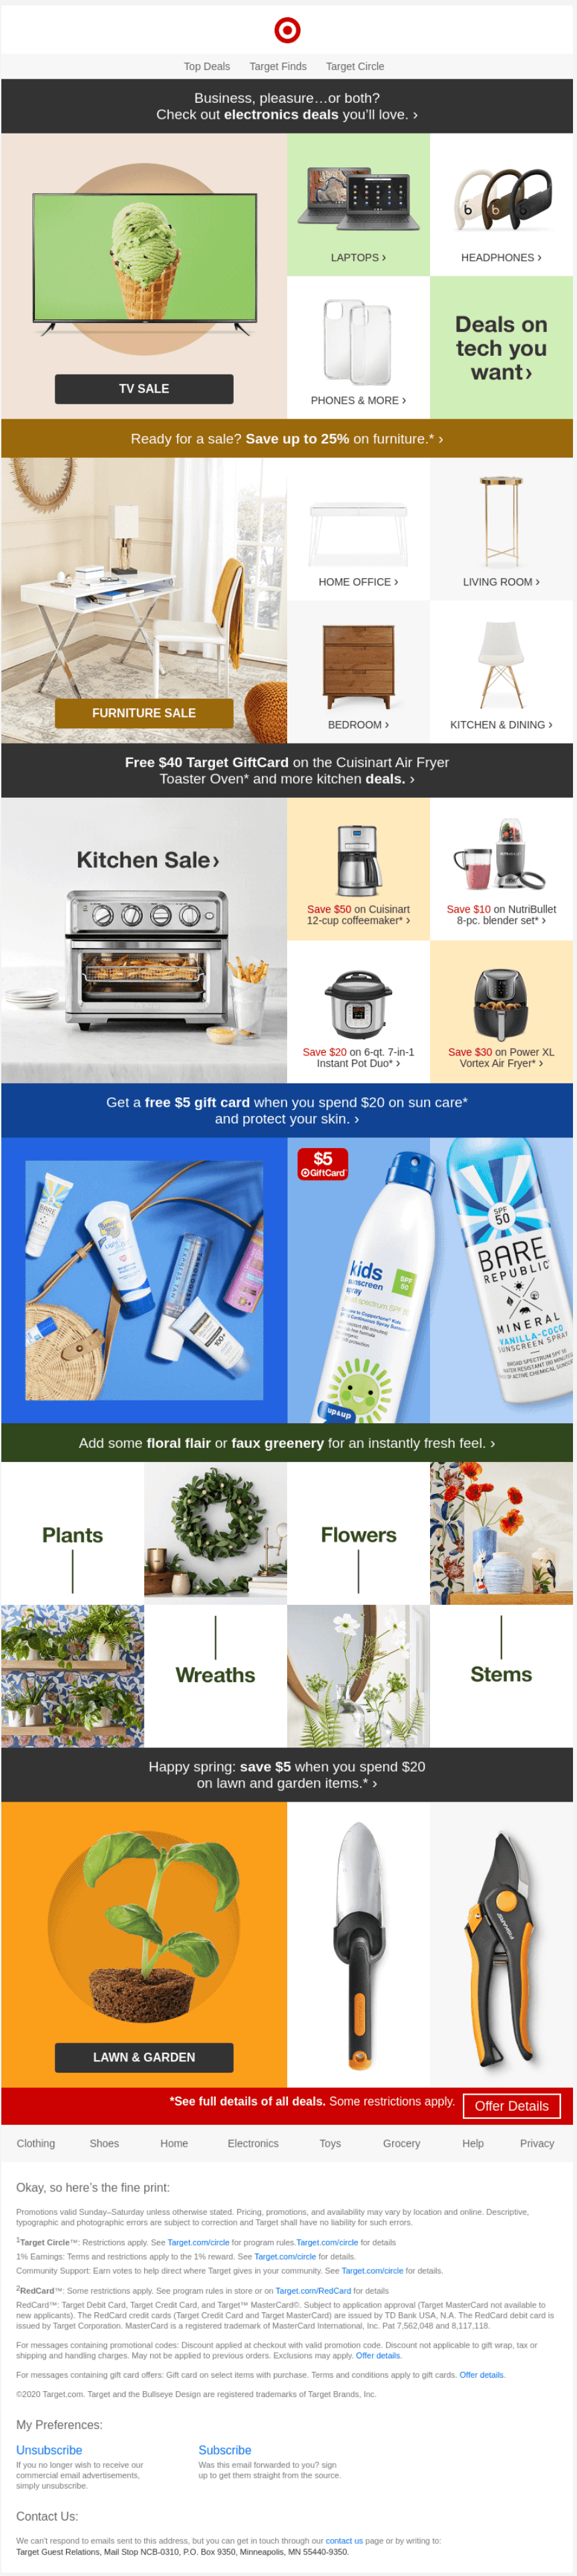 Target email providing multiple discounts